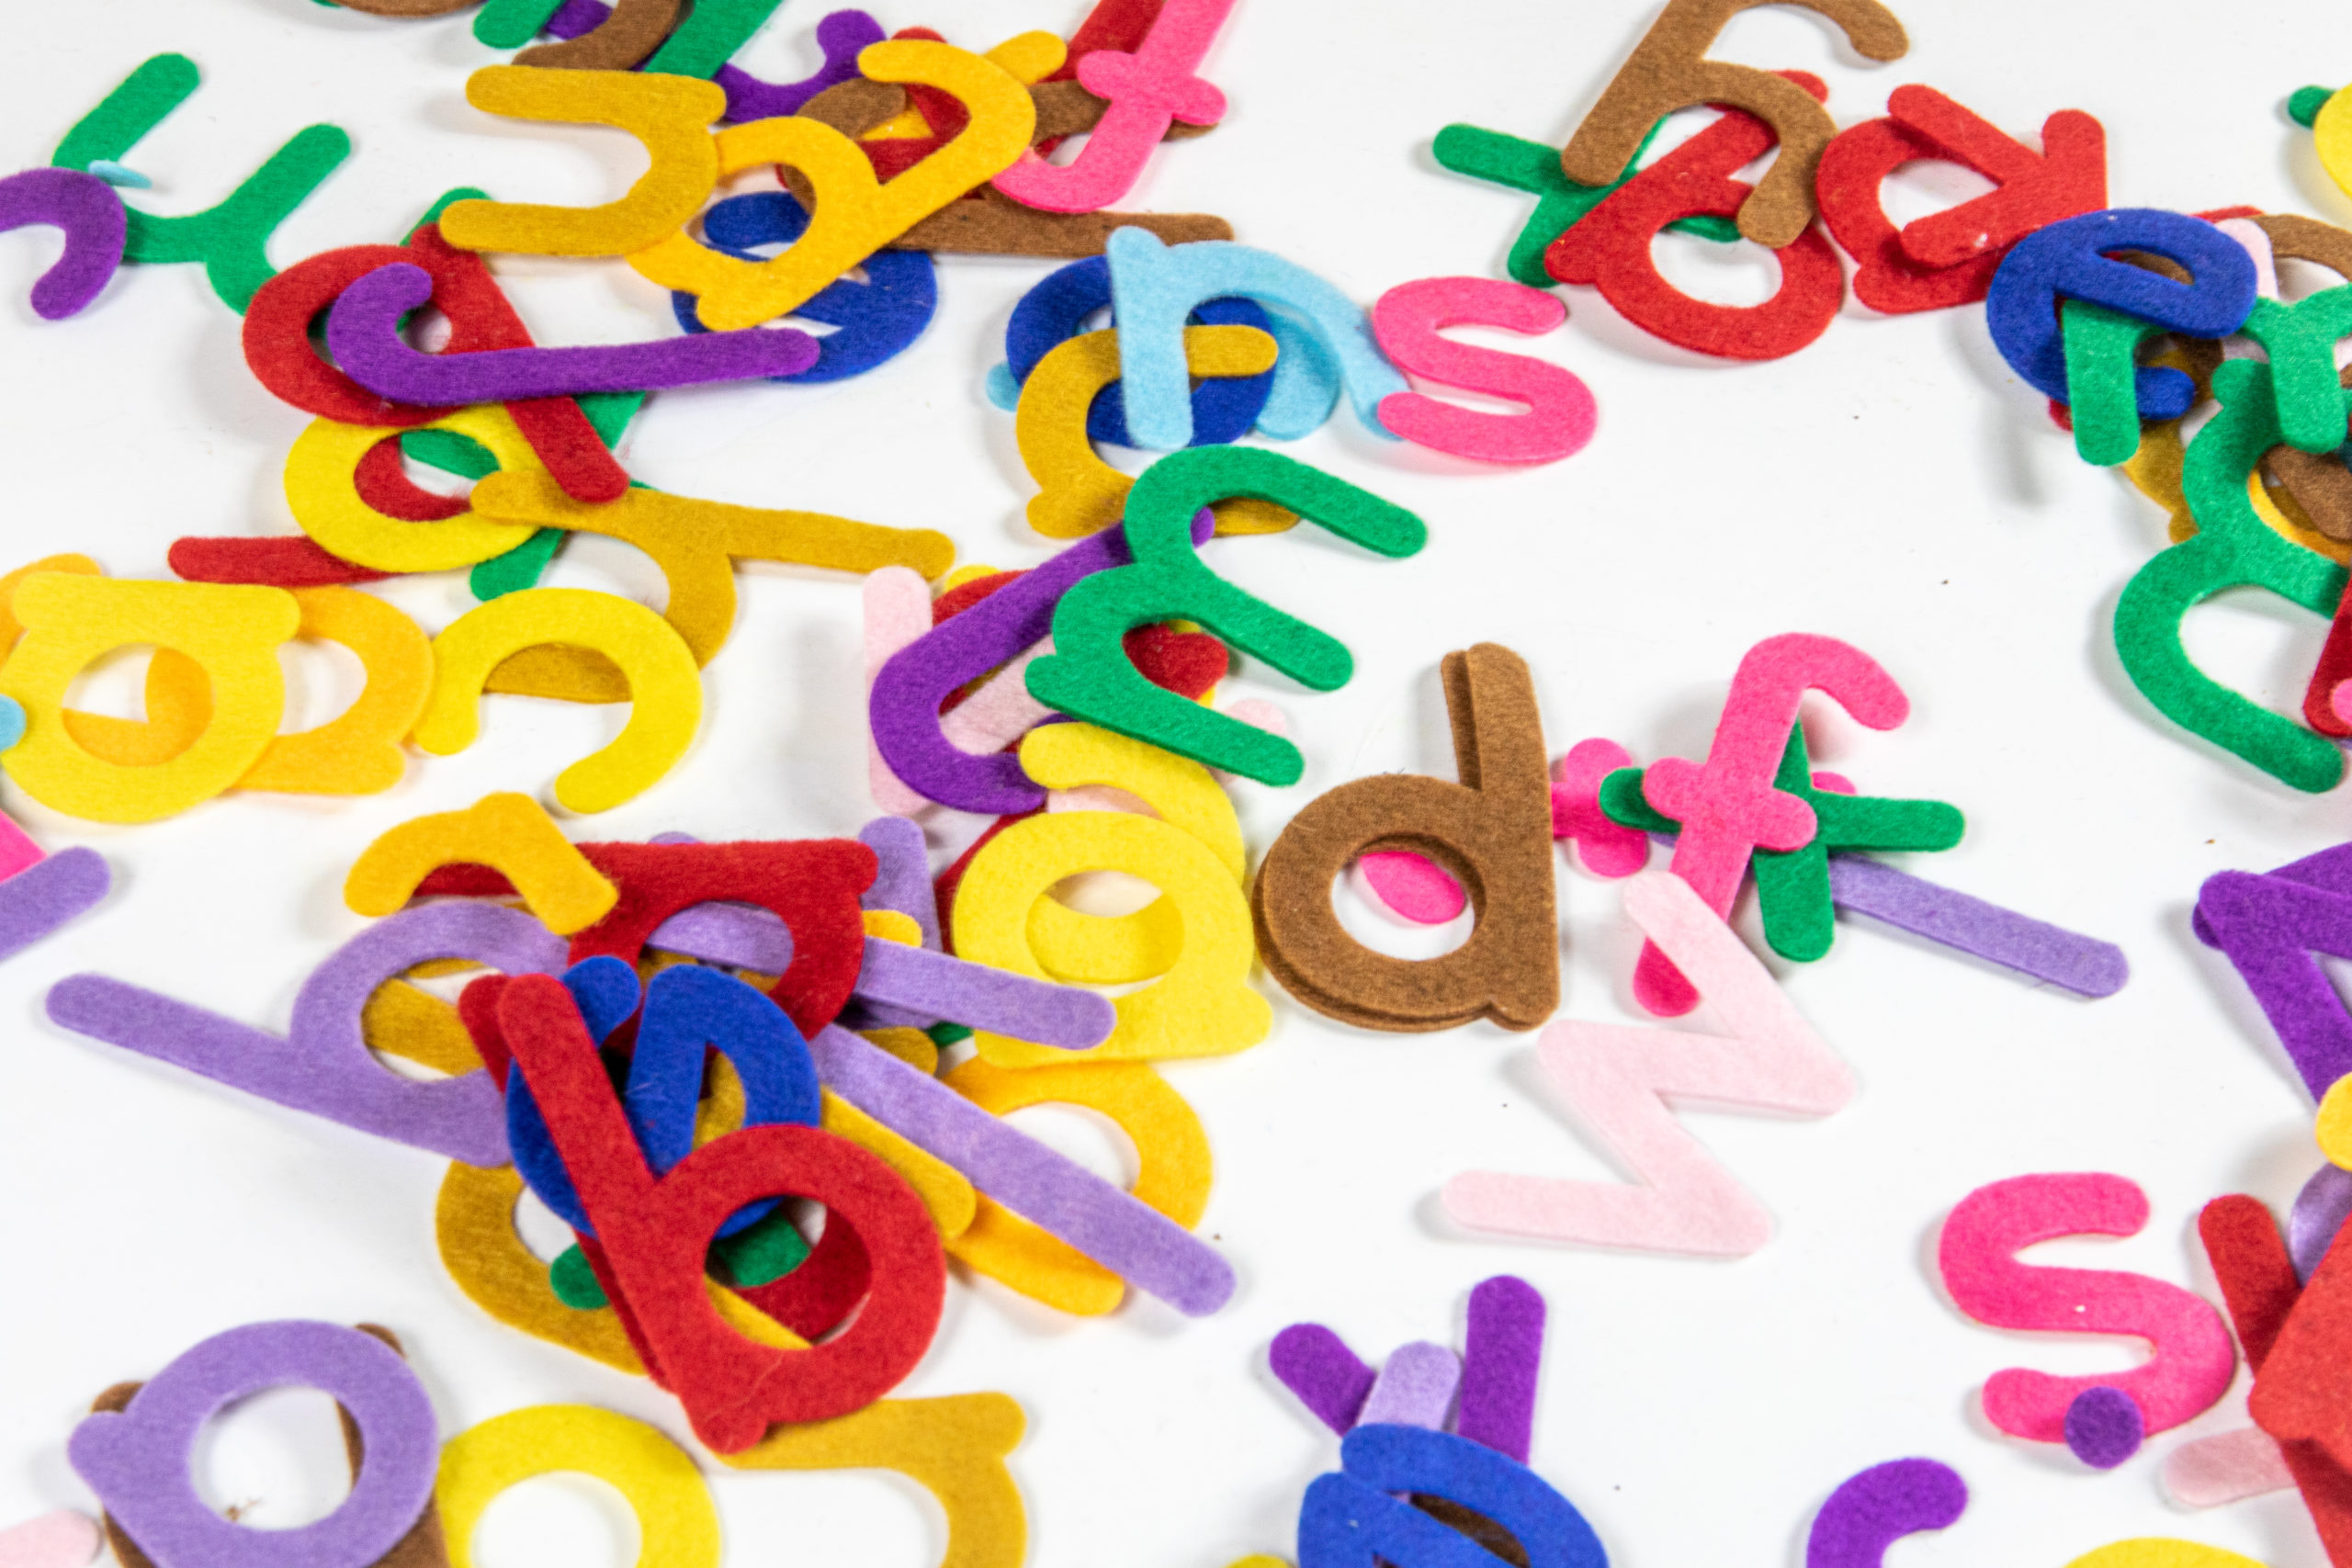 Colourful letters of the alphabet scattered on a white background